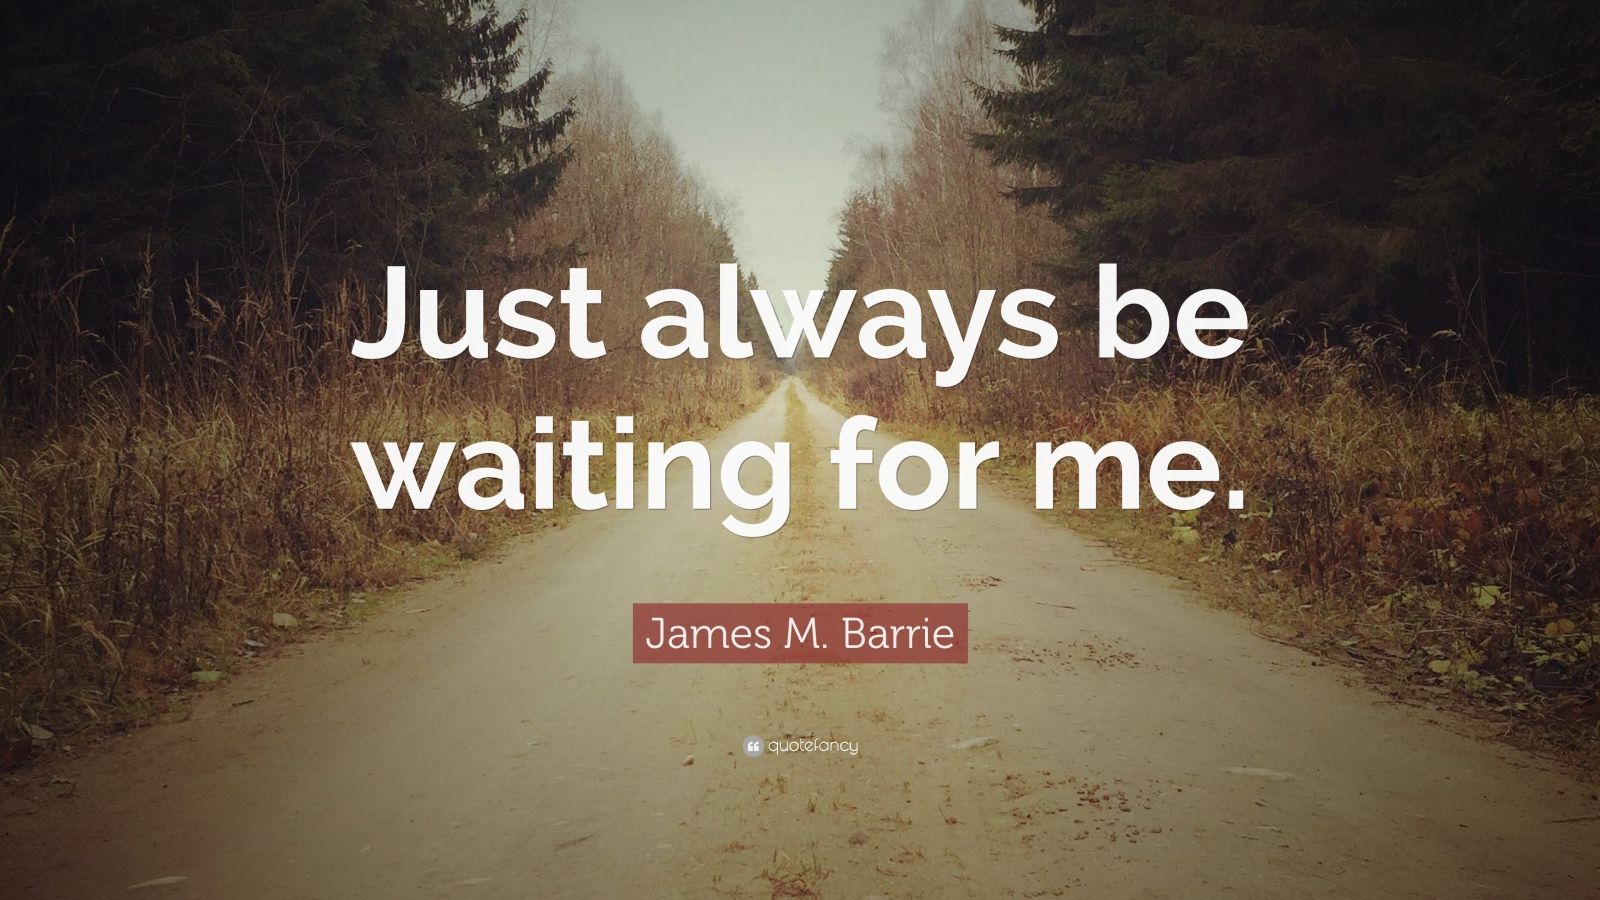 James M. Barrie Quote: “Just always be waiting for me.”